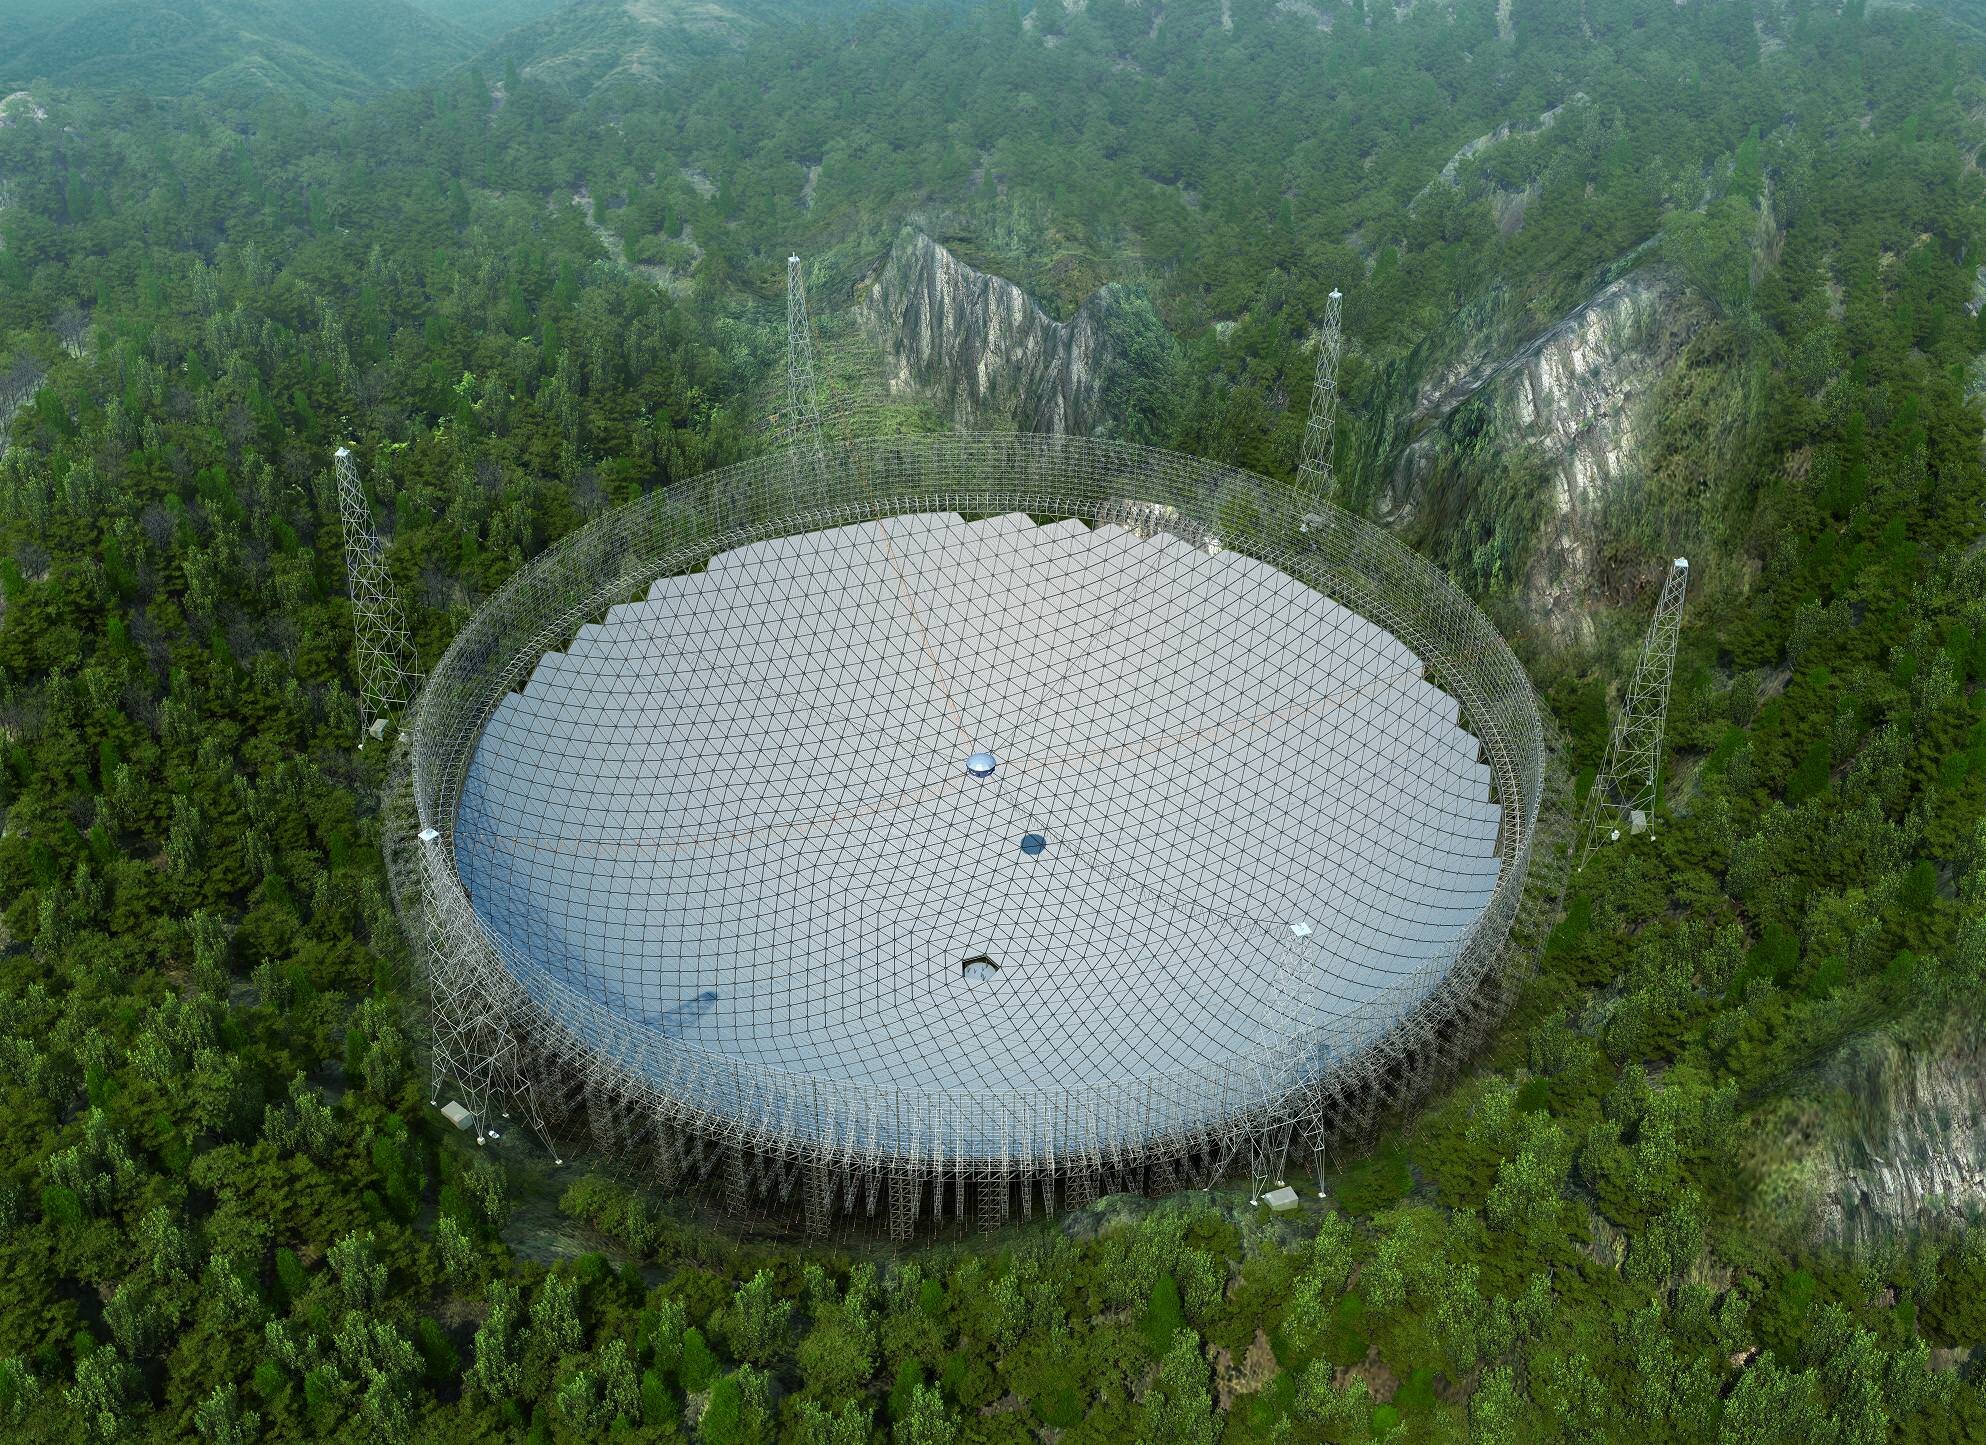 Alien signal from China telescope due to radio interference